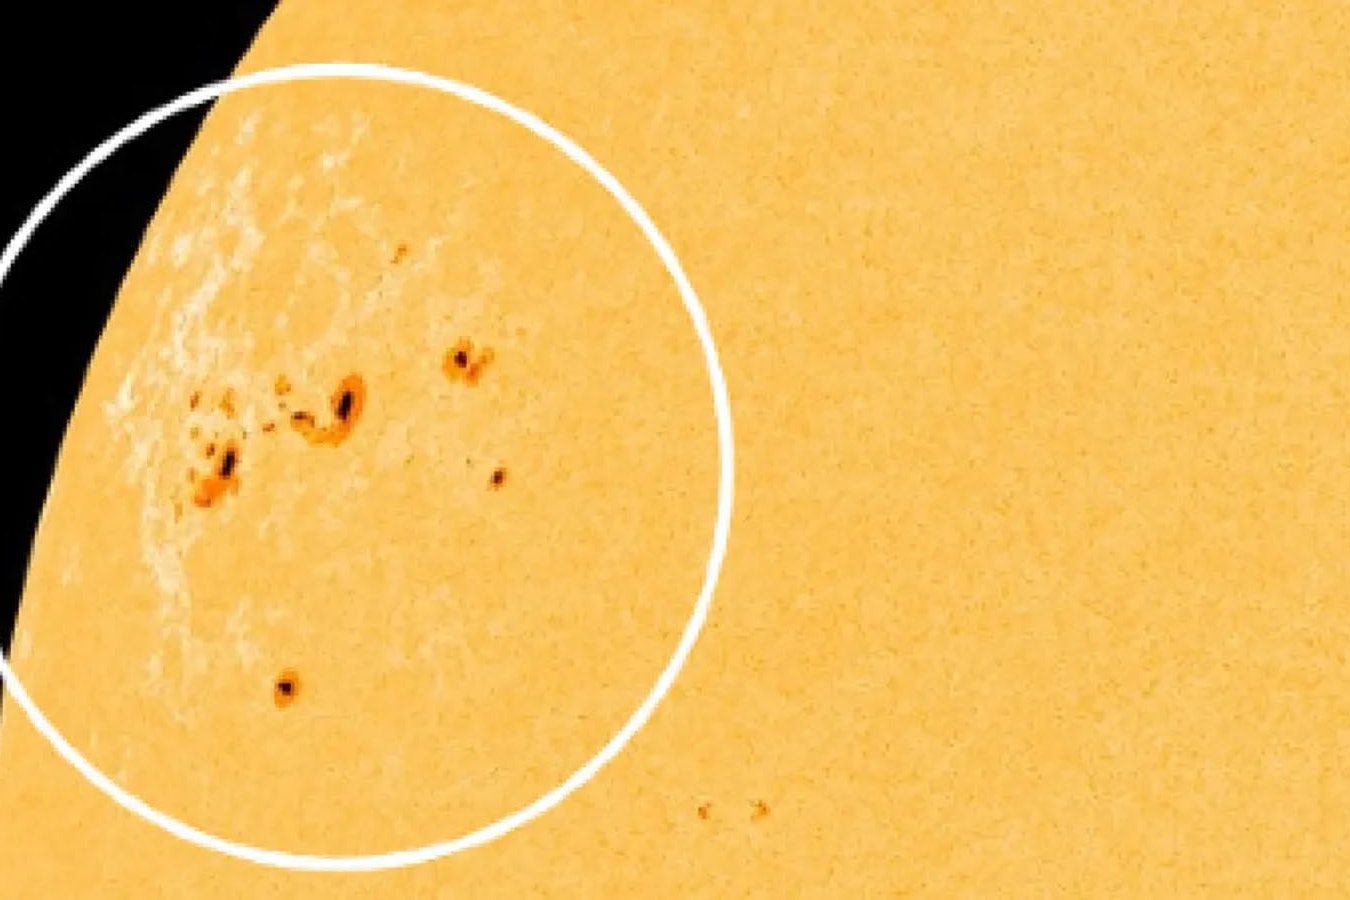 A giant sunspot archipelago, or a collection of sunspots, on the surface of the sun covers an area more than 15 times the width of Earth.